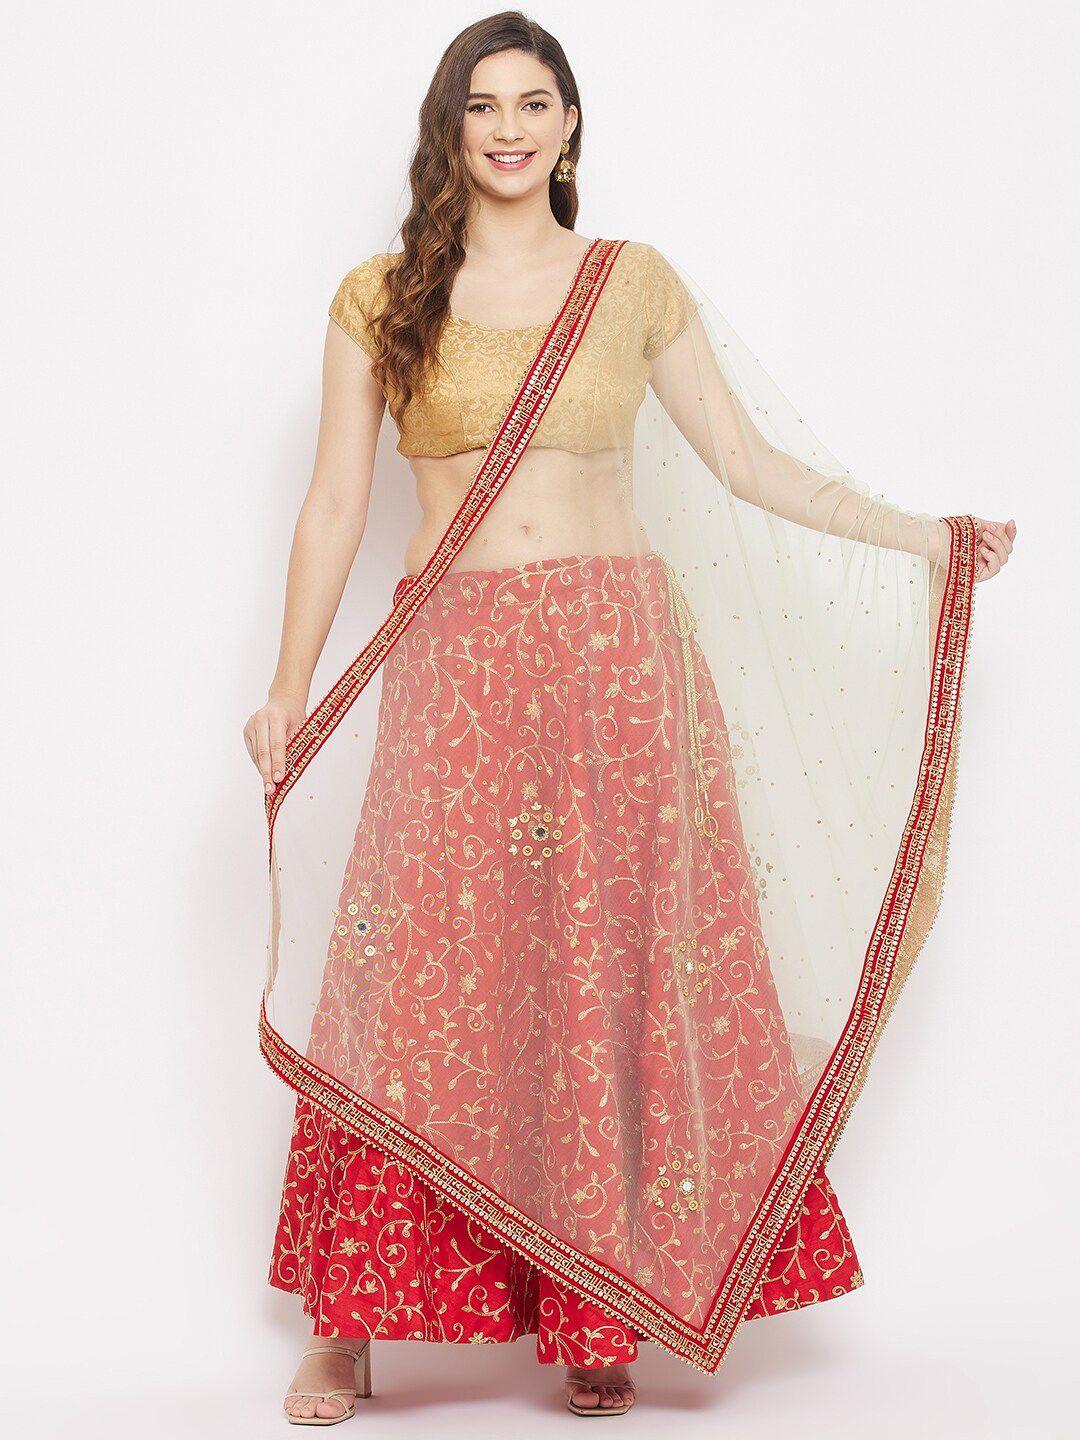 clora-creation-beige-&-red-ethnic-motifs-embroidered-net-dupatta-with-beads-and-stones